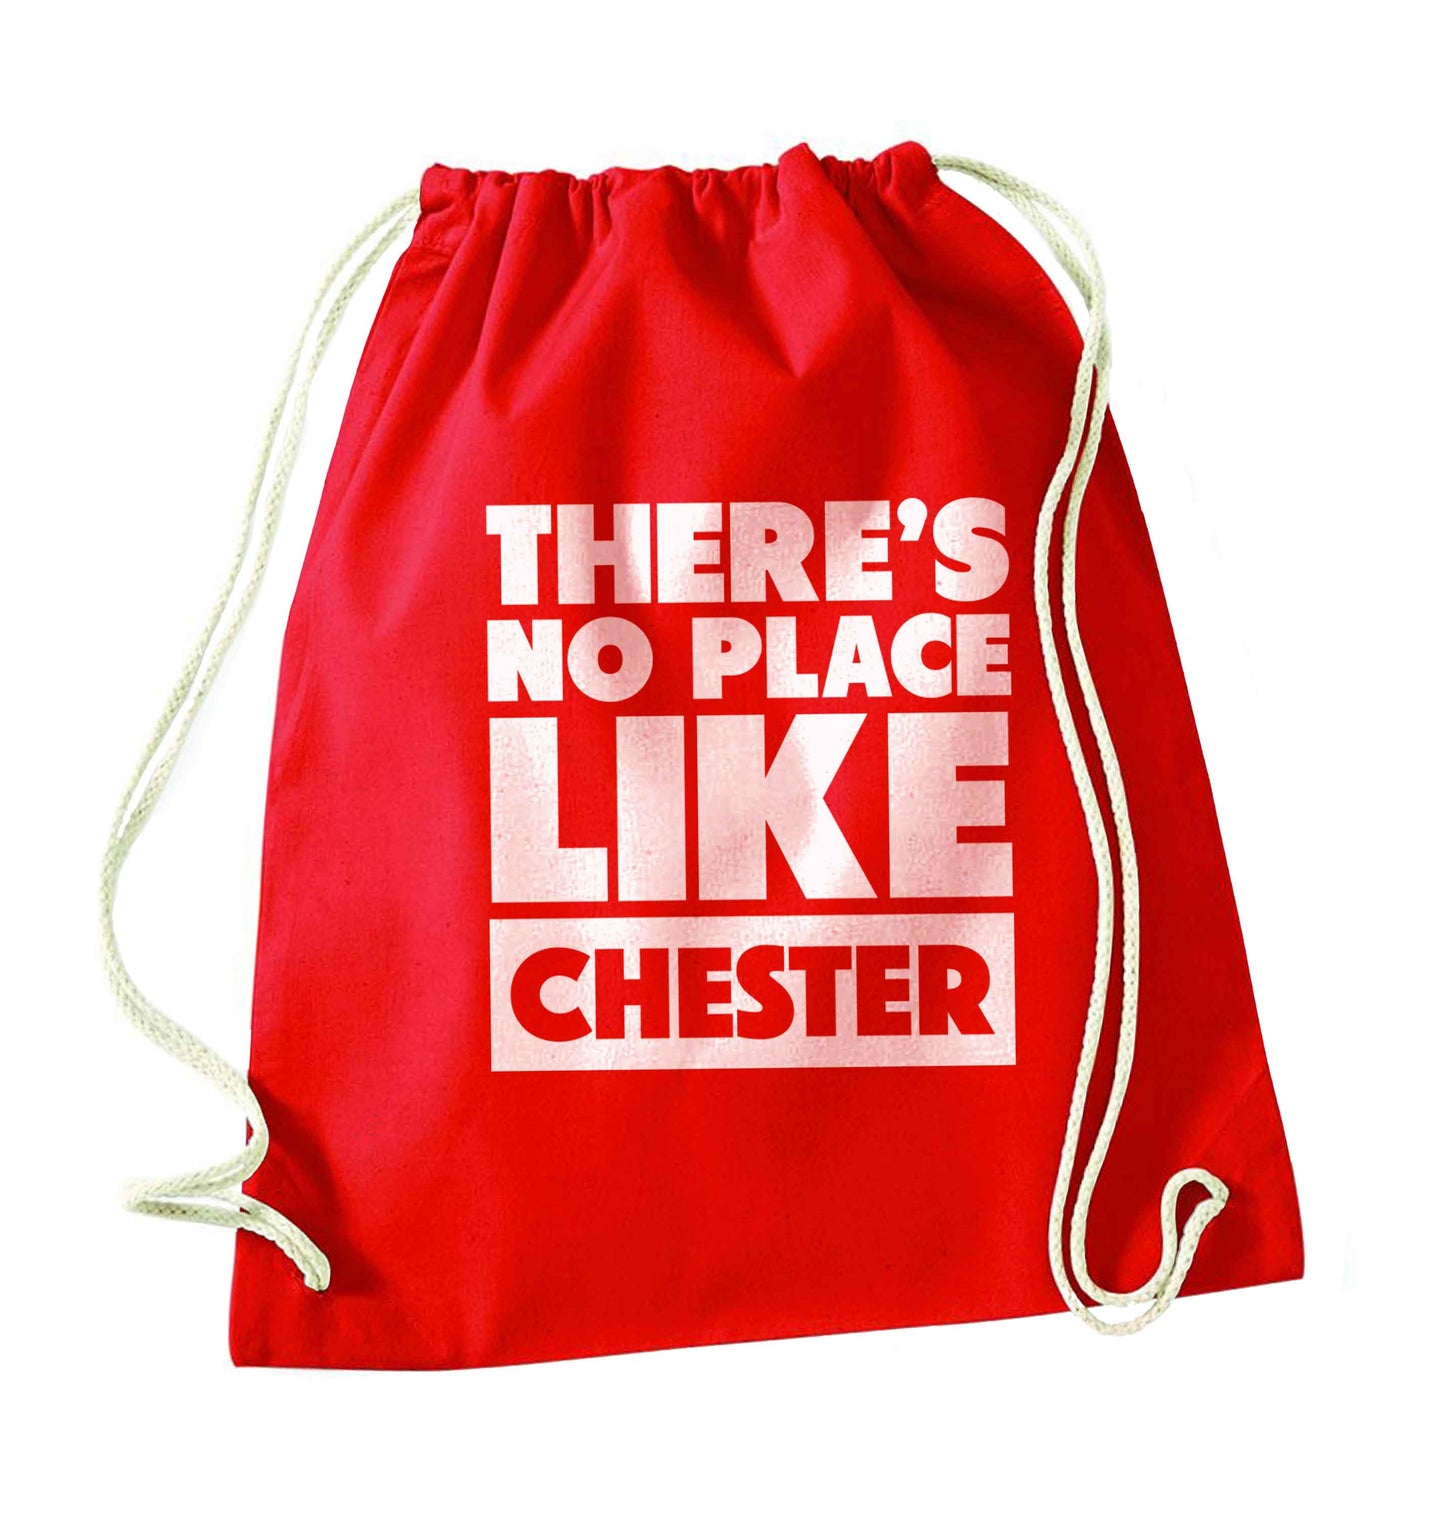 There's no place like Chester red drawstring bag 